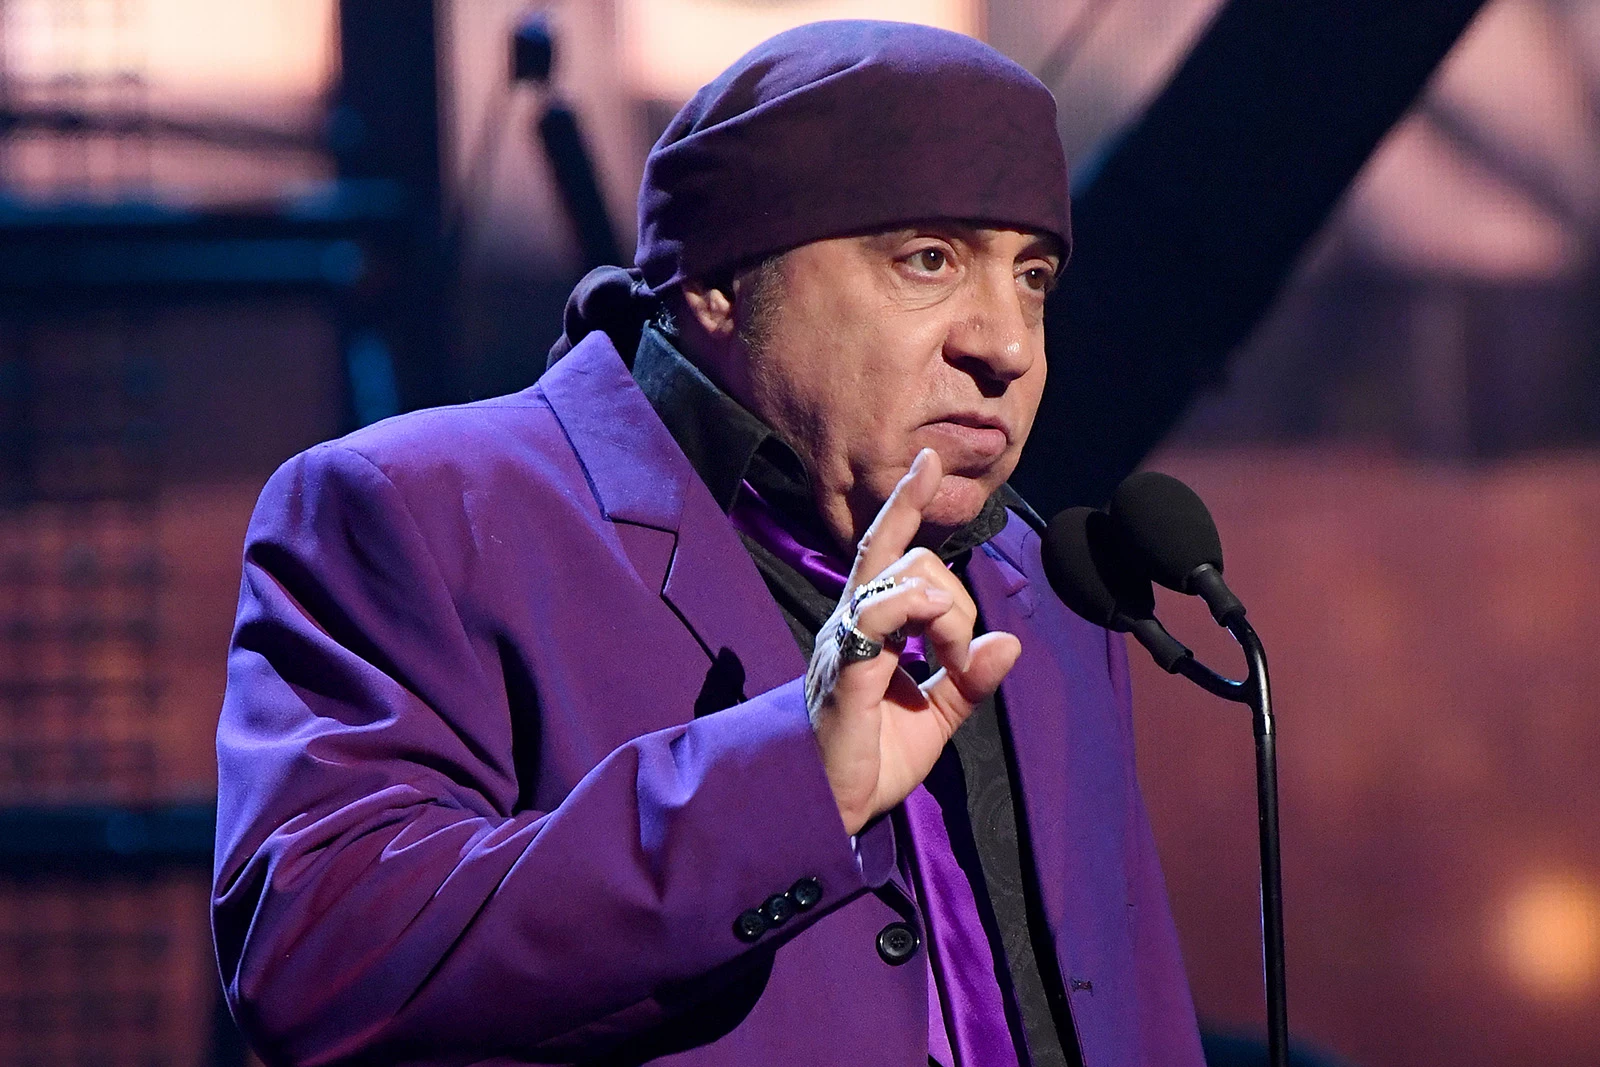 When One of Steven Van Zandts Heroes Pulled a Gun on picture